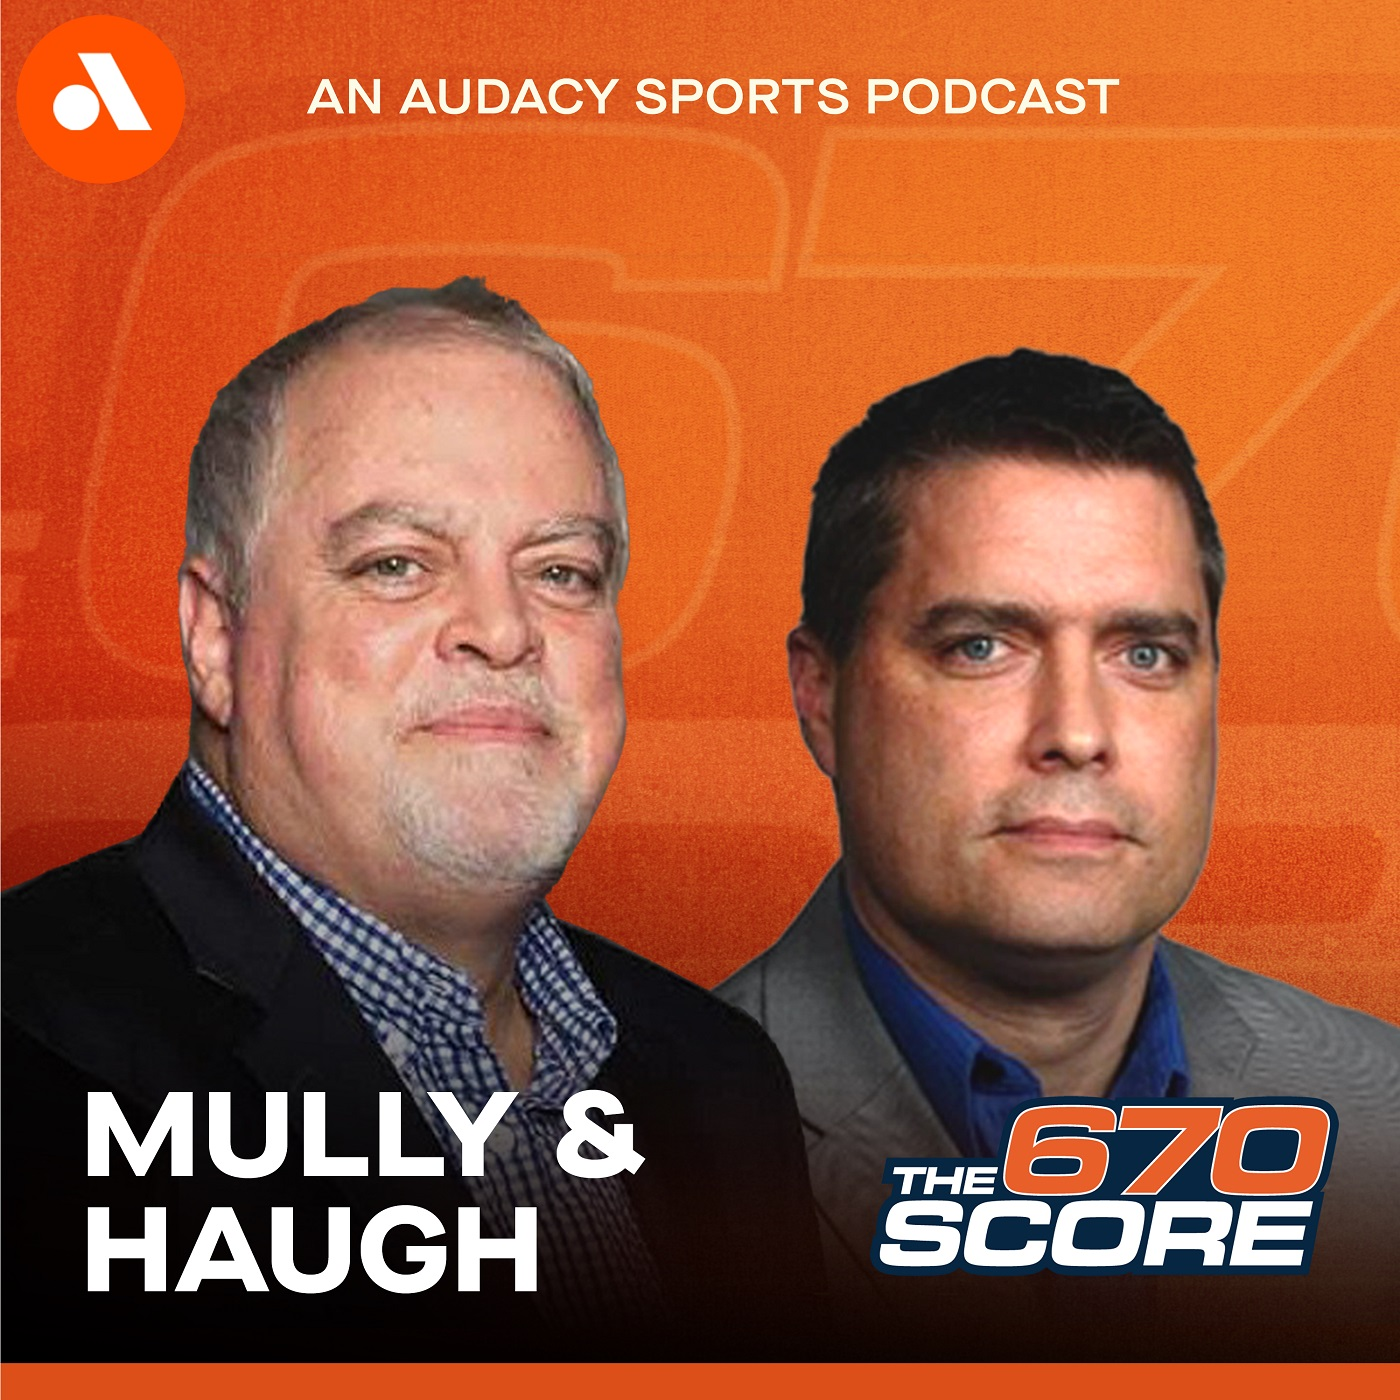 Mully & Haugh: Lori Lightfoot, Ozzie Guillen & Stacey Dales interviews (Hour 4)